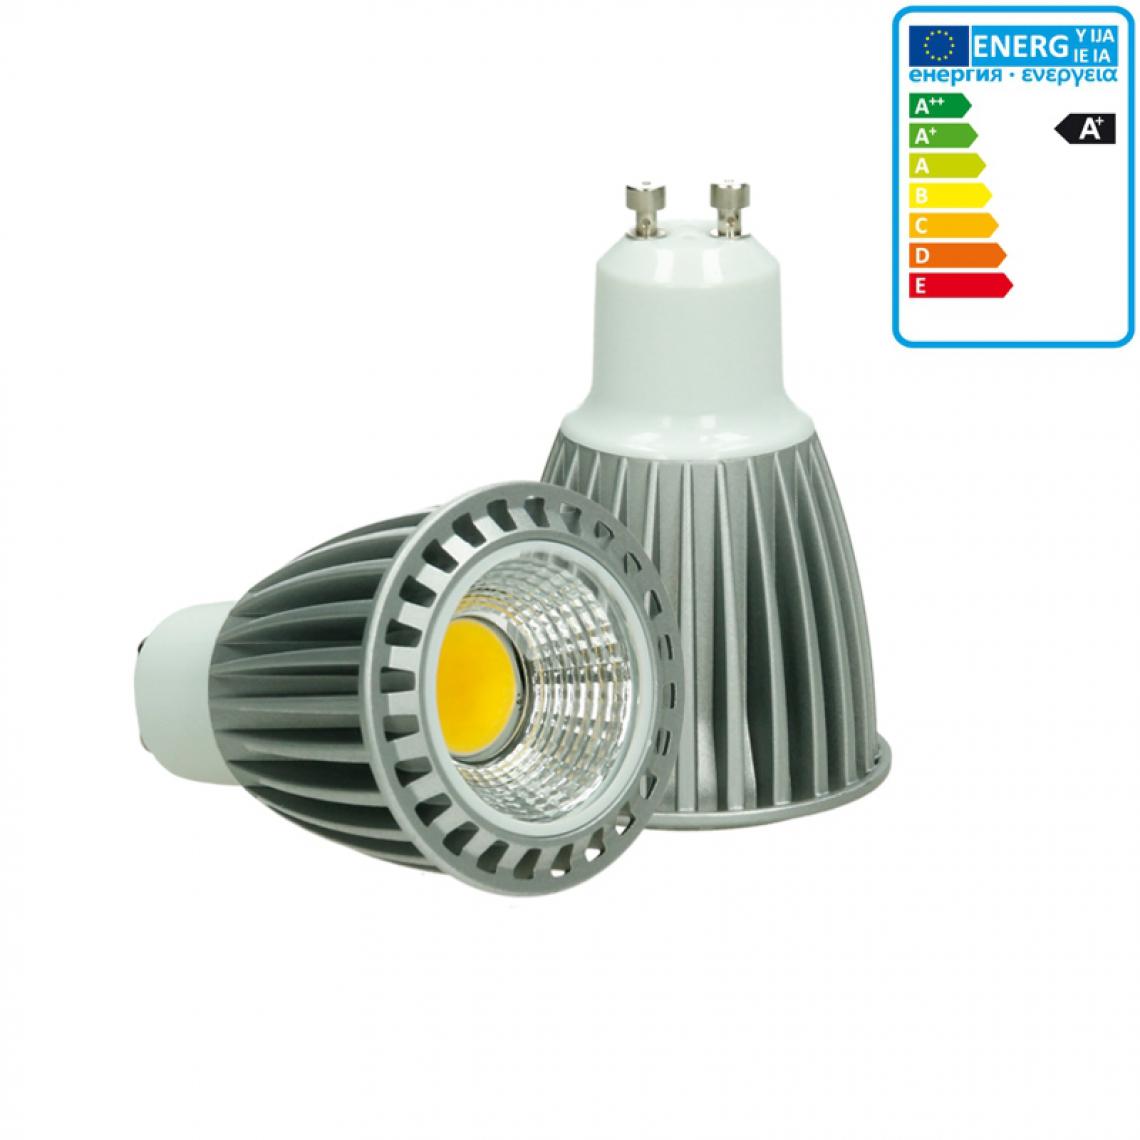 Ecd Germany - ECD Germany LED COB GU10 Spot Lampe Ampoule 9W Dimmable Blanc Froid - Ampoules LED